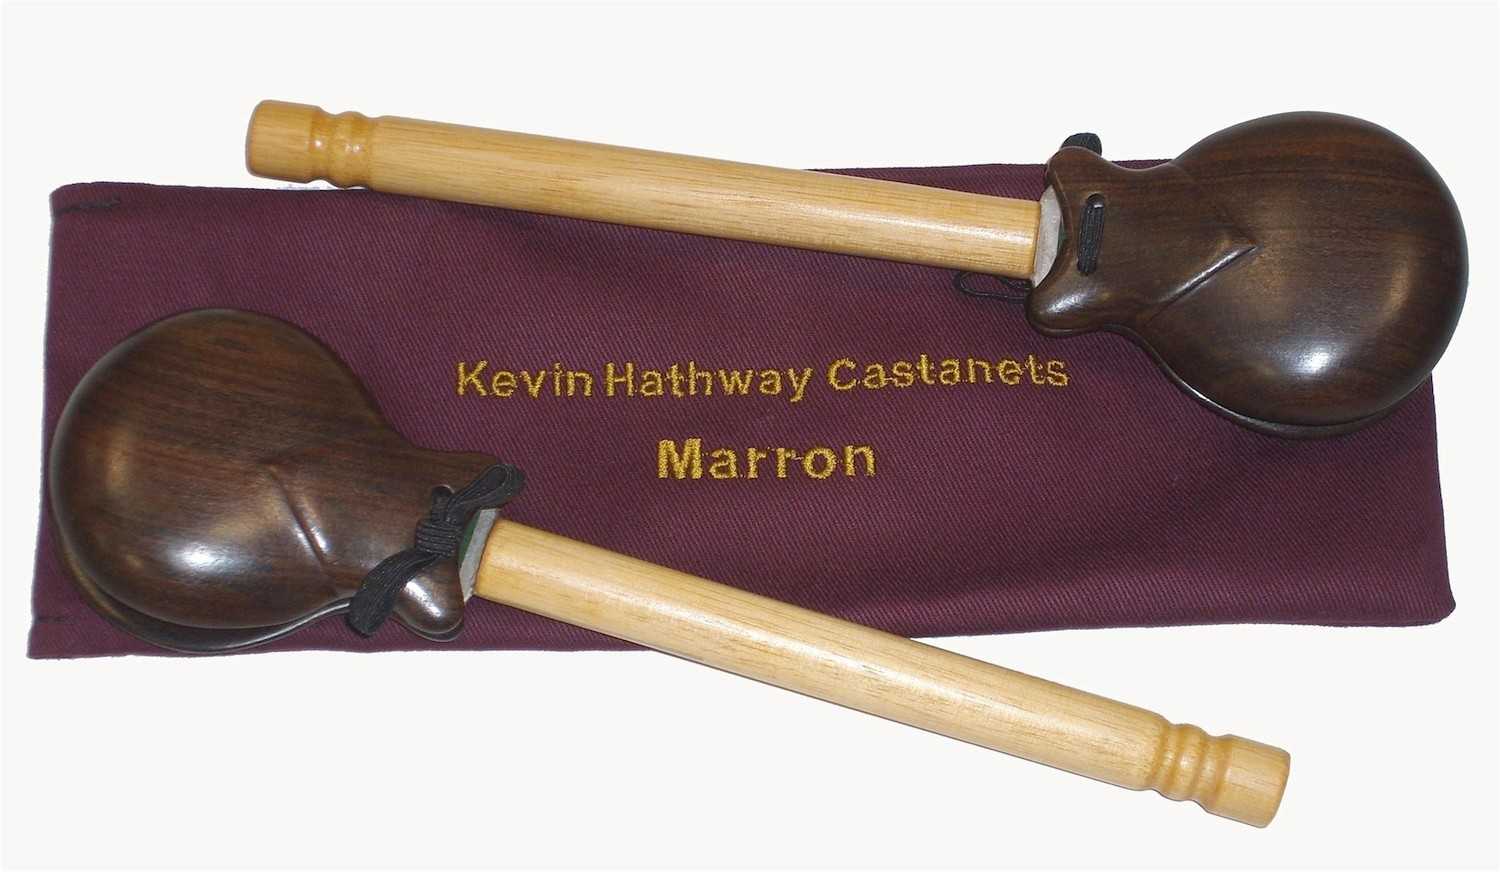 Kevin Hathway Castanets